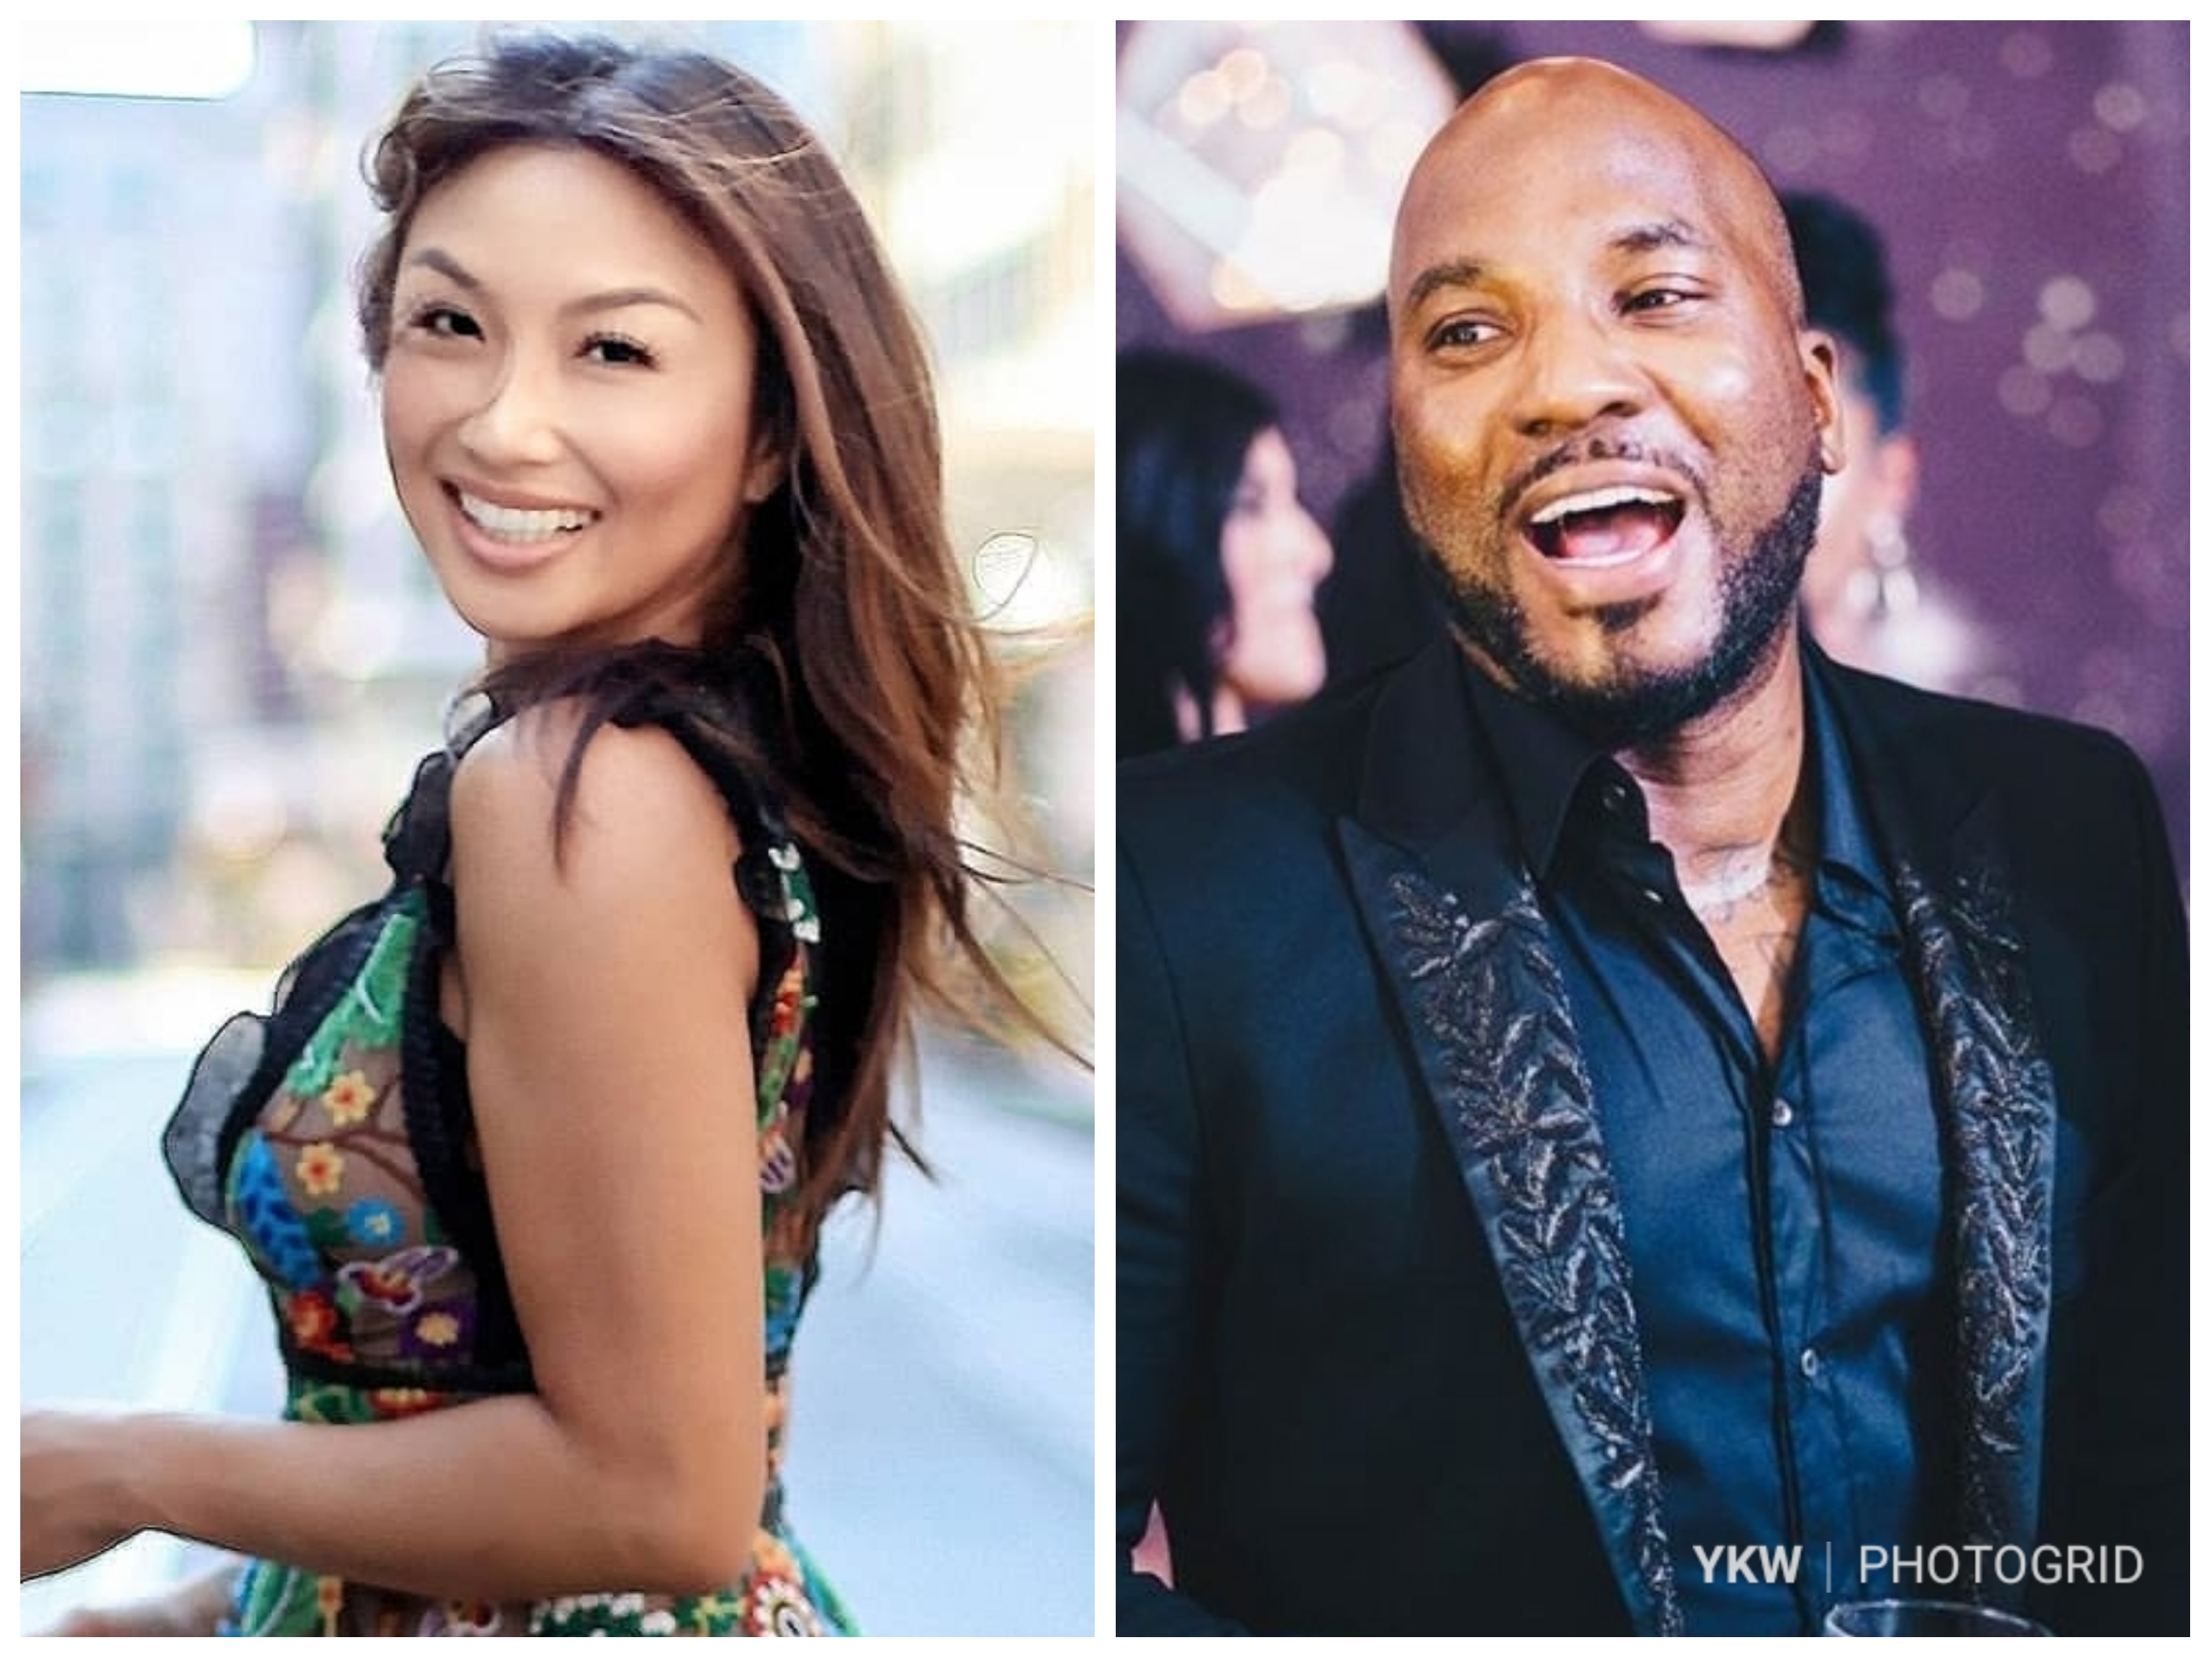 Jeannie Mai And Jeezy Are Officially Dating